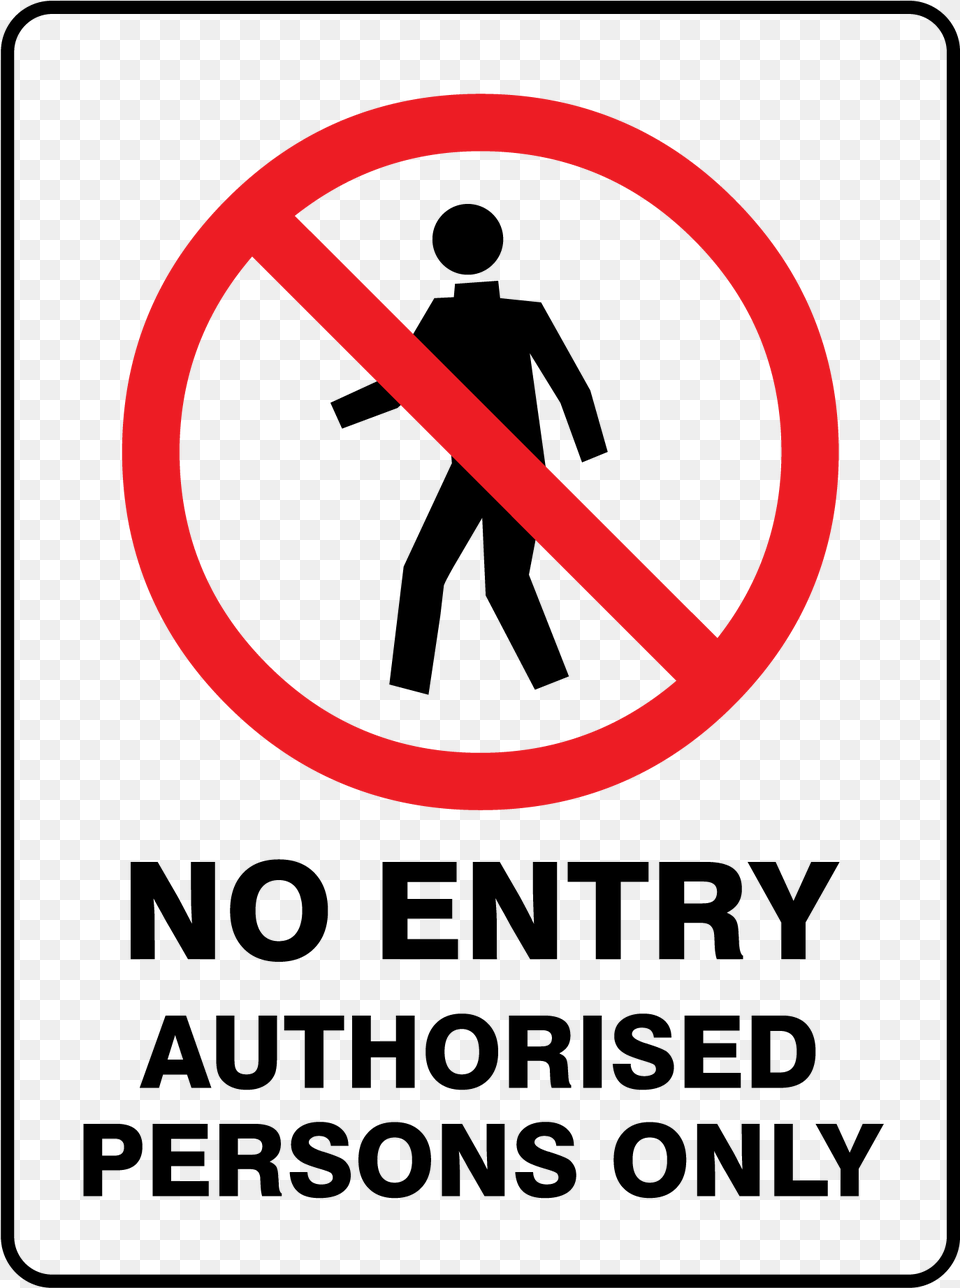 No Entry Authorised Persons Only Authorized Person, Sign, Symbol, Road Sign, Disk Png